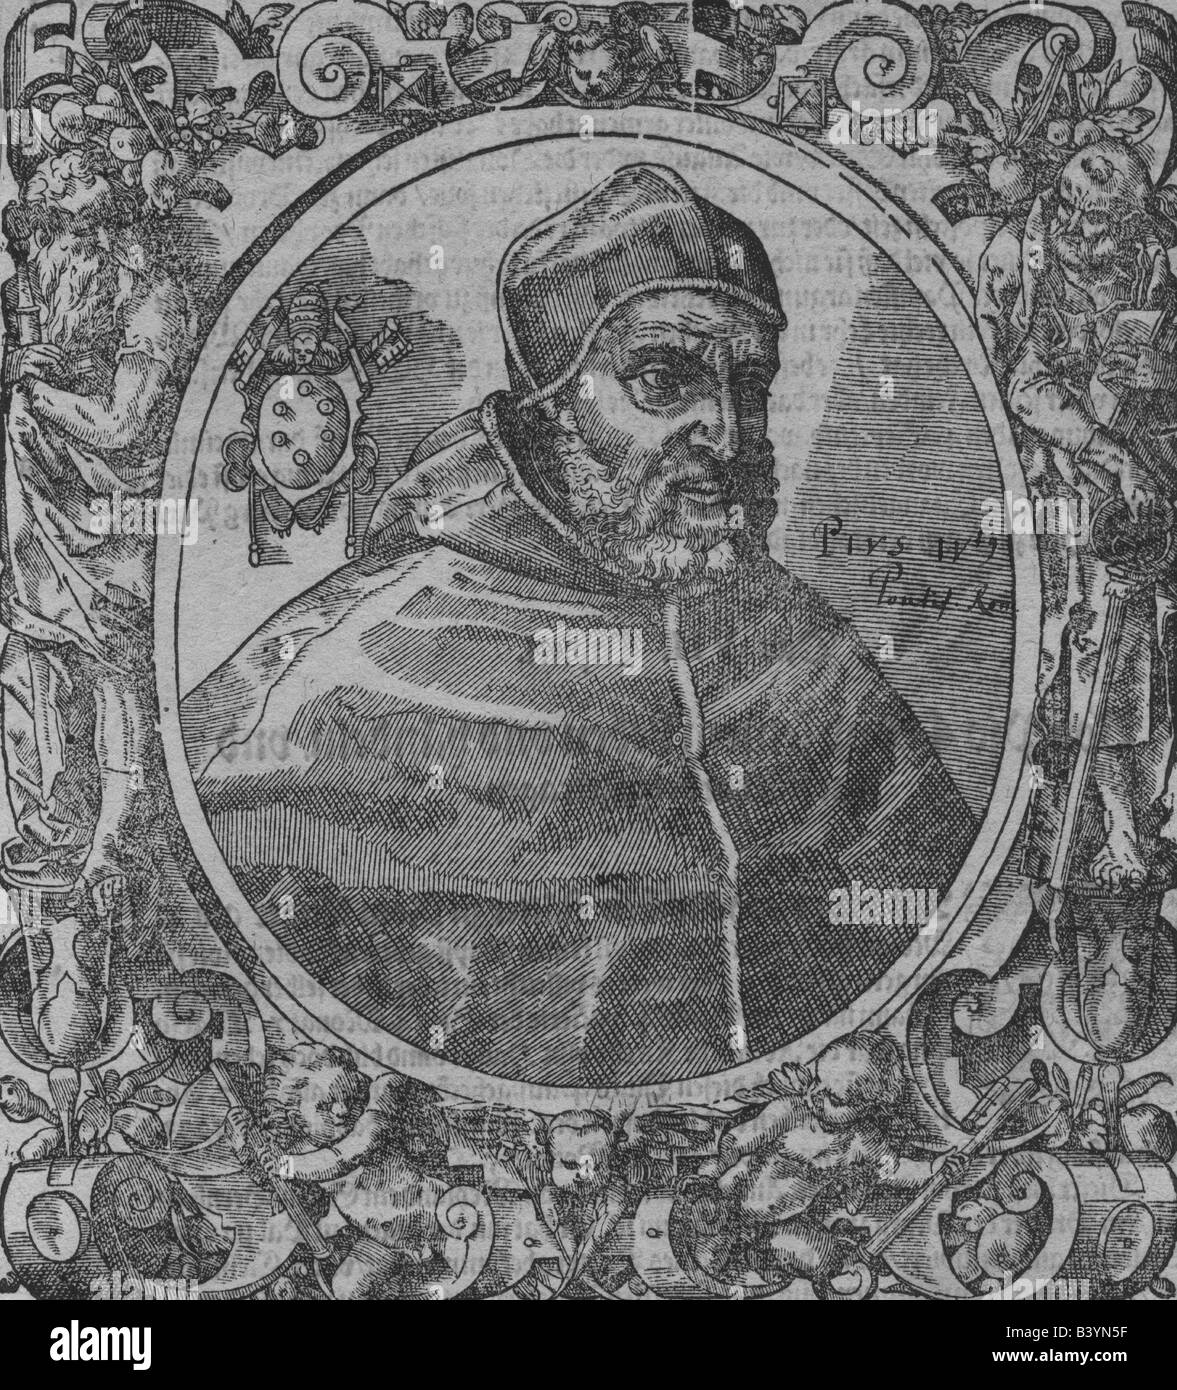 Pius IV (Giovanni Angelo de Medici di Marignano), 31.3.1499 - 9.12.1565, Pope 25.12.1559 - 9.12.1565, portrait, copper engraving, 17. Jahrhundert, , Artist's Copyright has not to be cleared Stock Photo